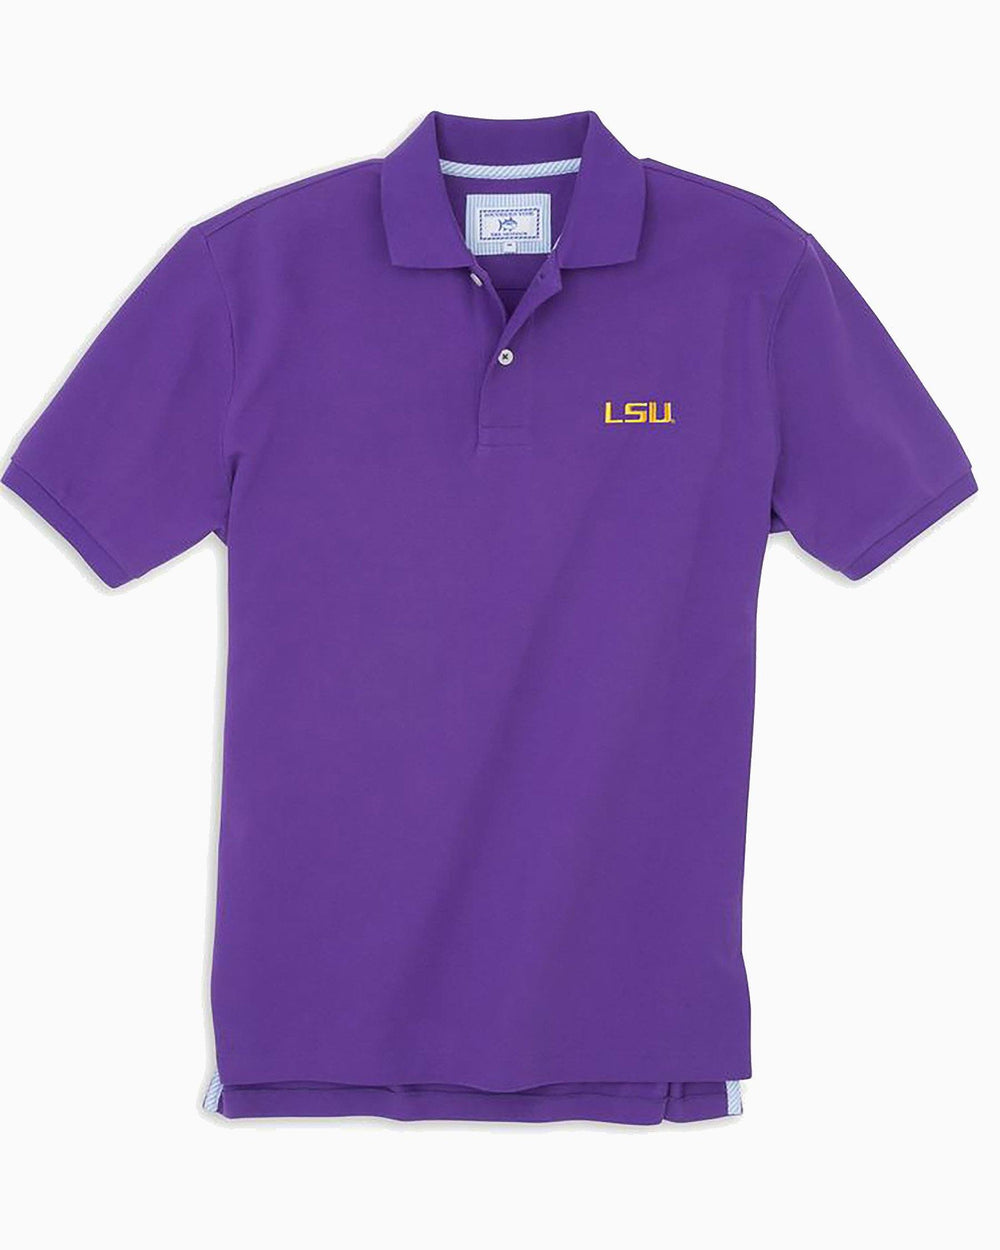 The front view of the Men's Purple LSU Tigers Pique Polo Shirt by Southern Tide - Regal Purple